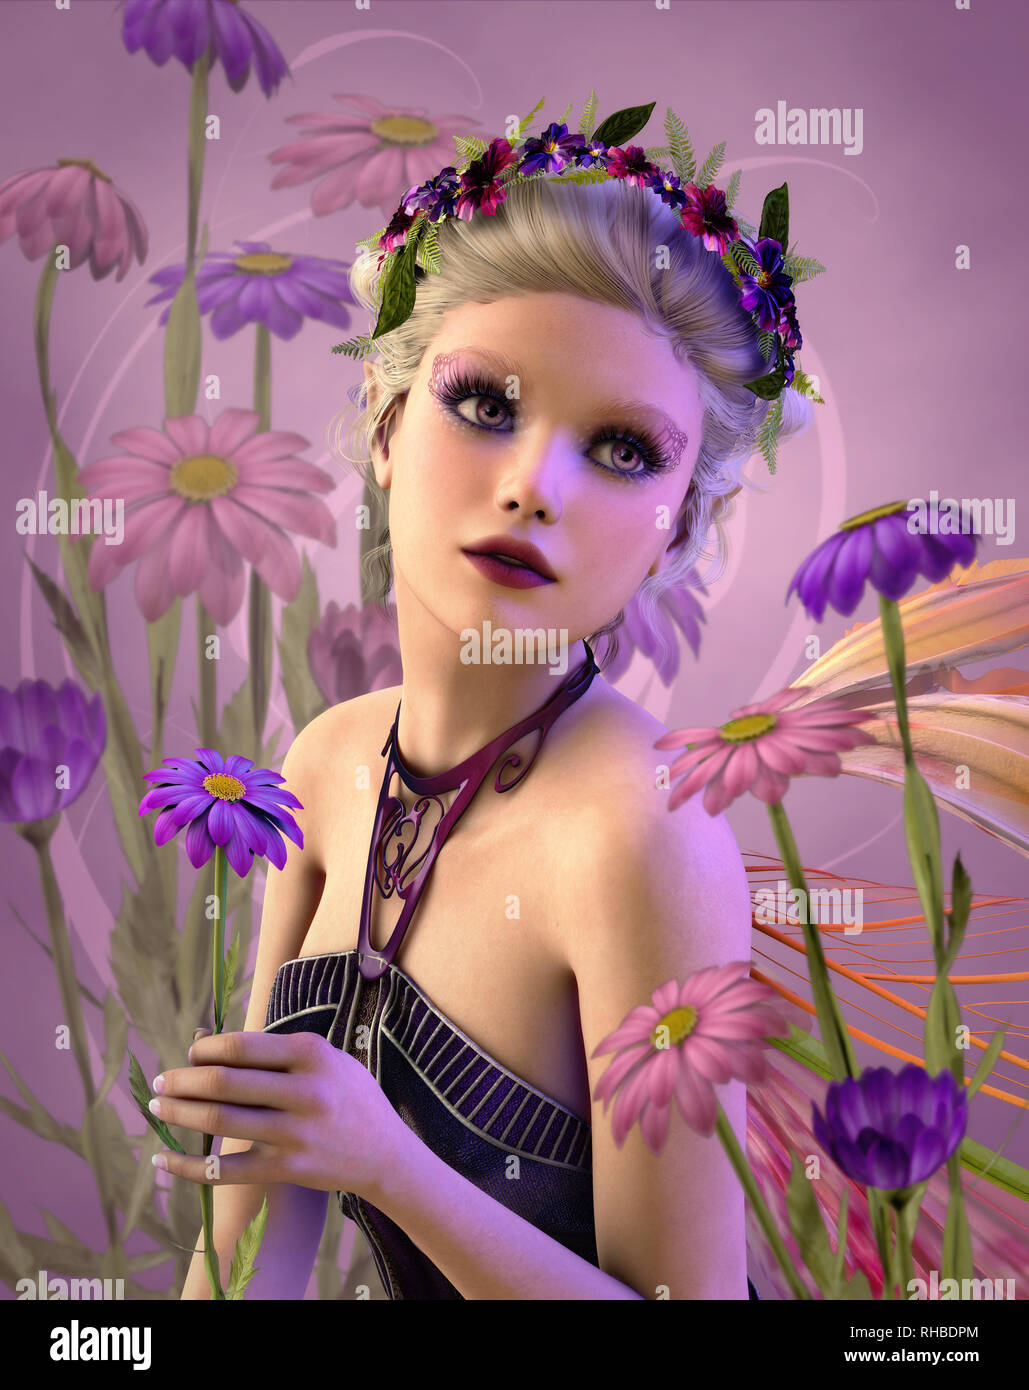 3d computer graphics of a fairylike Girl with daisies and a wreath of flowers on her head Stock Photo